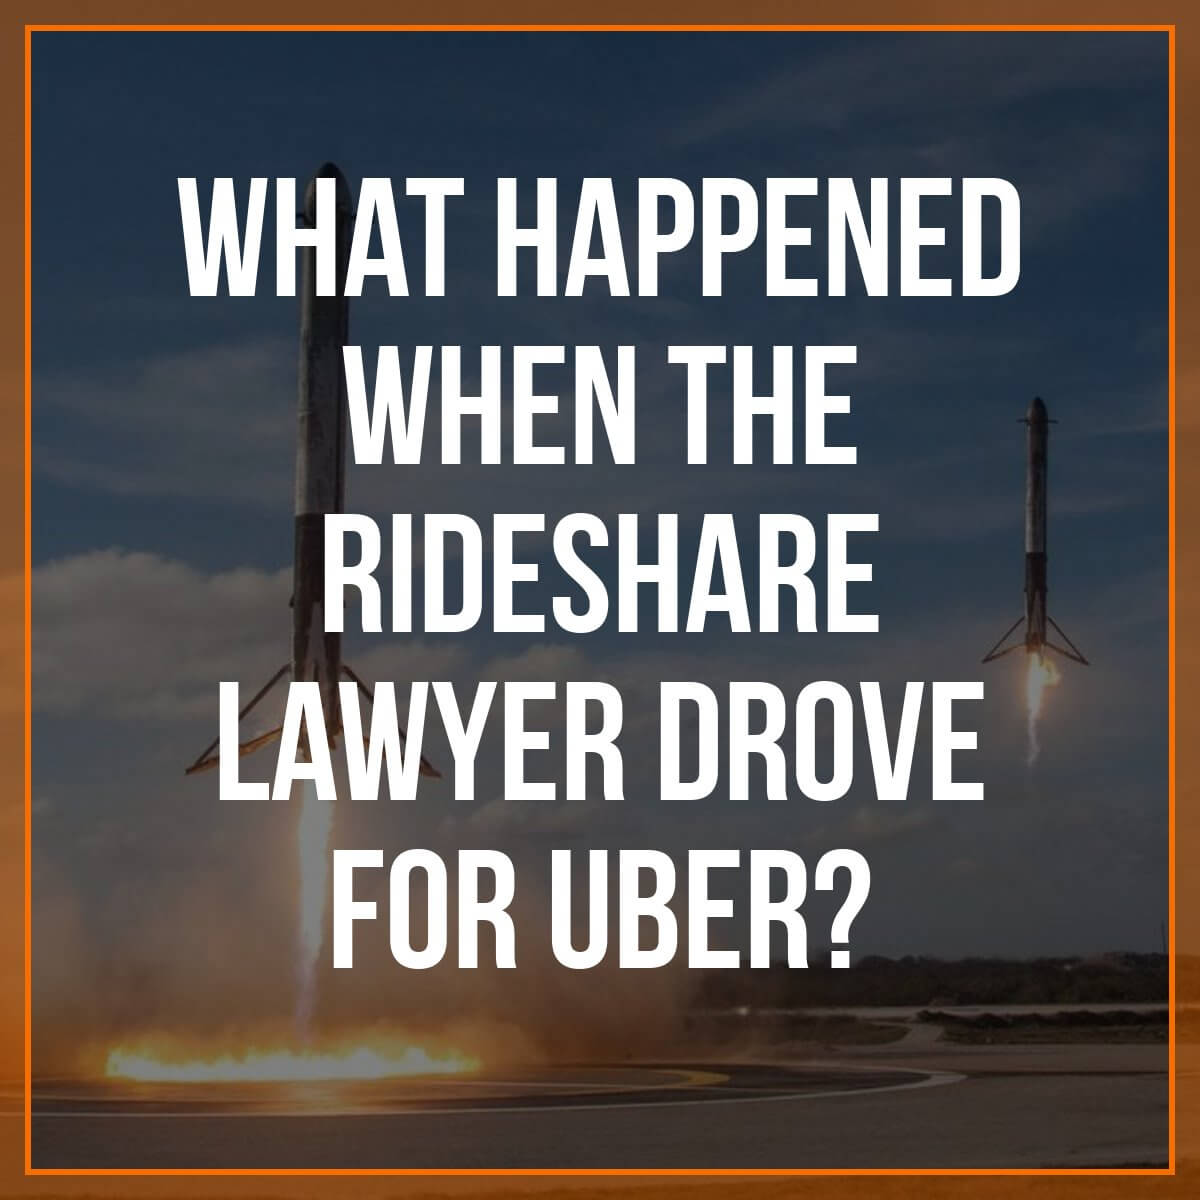 What Happened When The Rideshare Lawyer Drove For Uber?